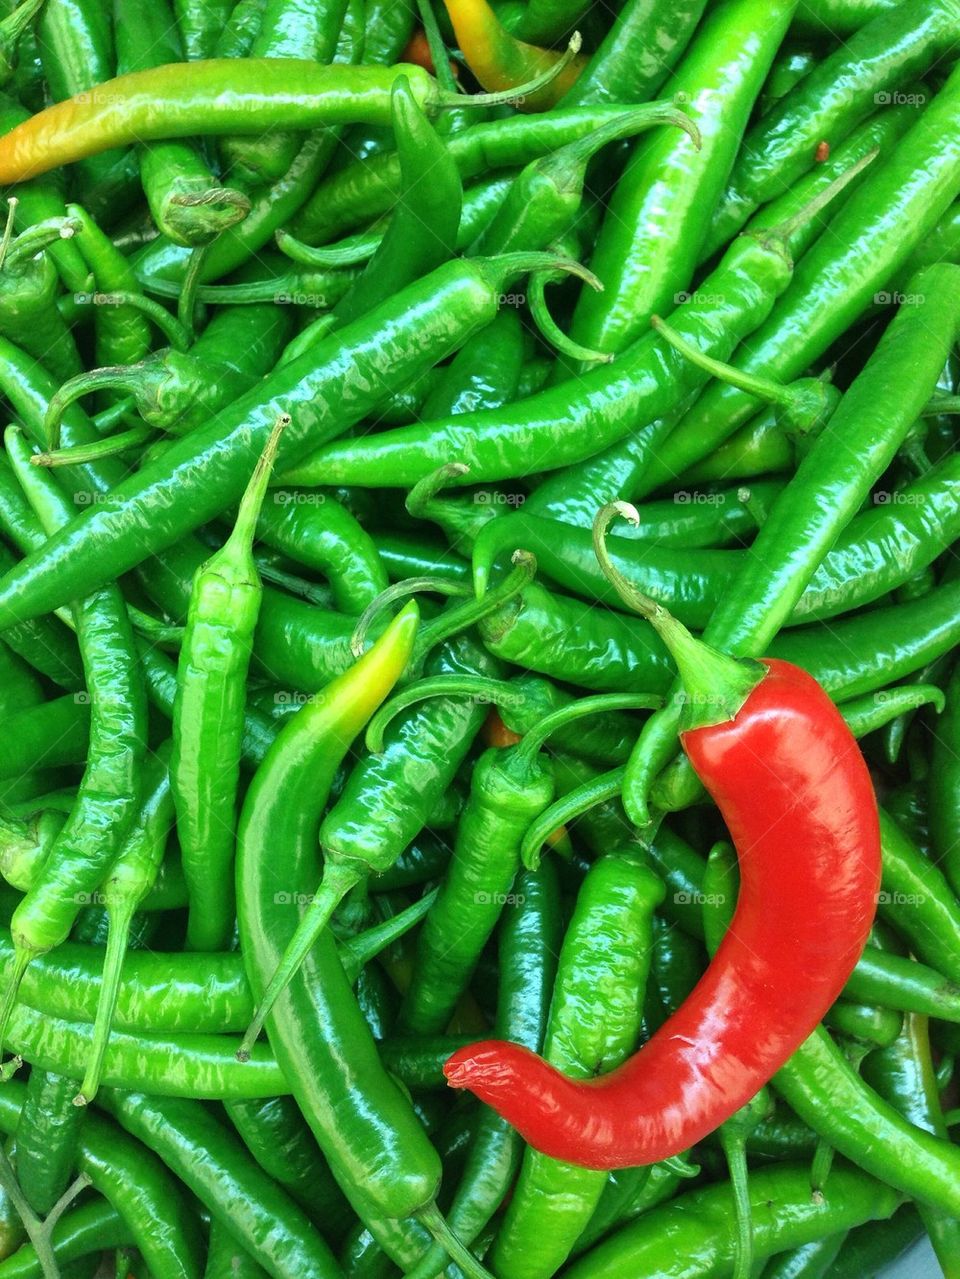 Red chilli on green chillies